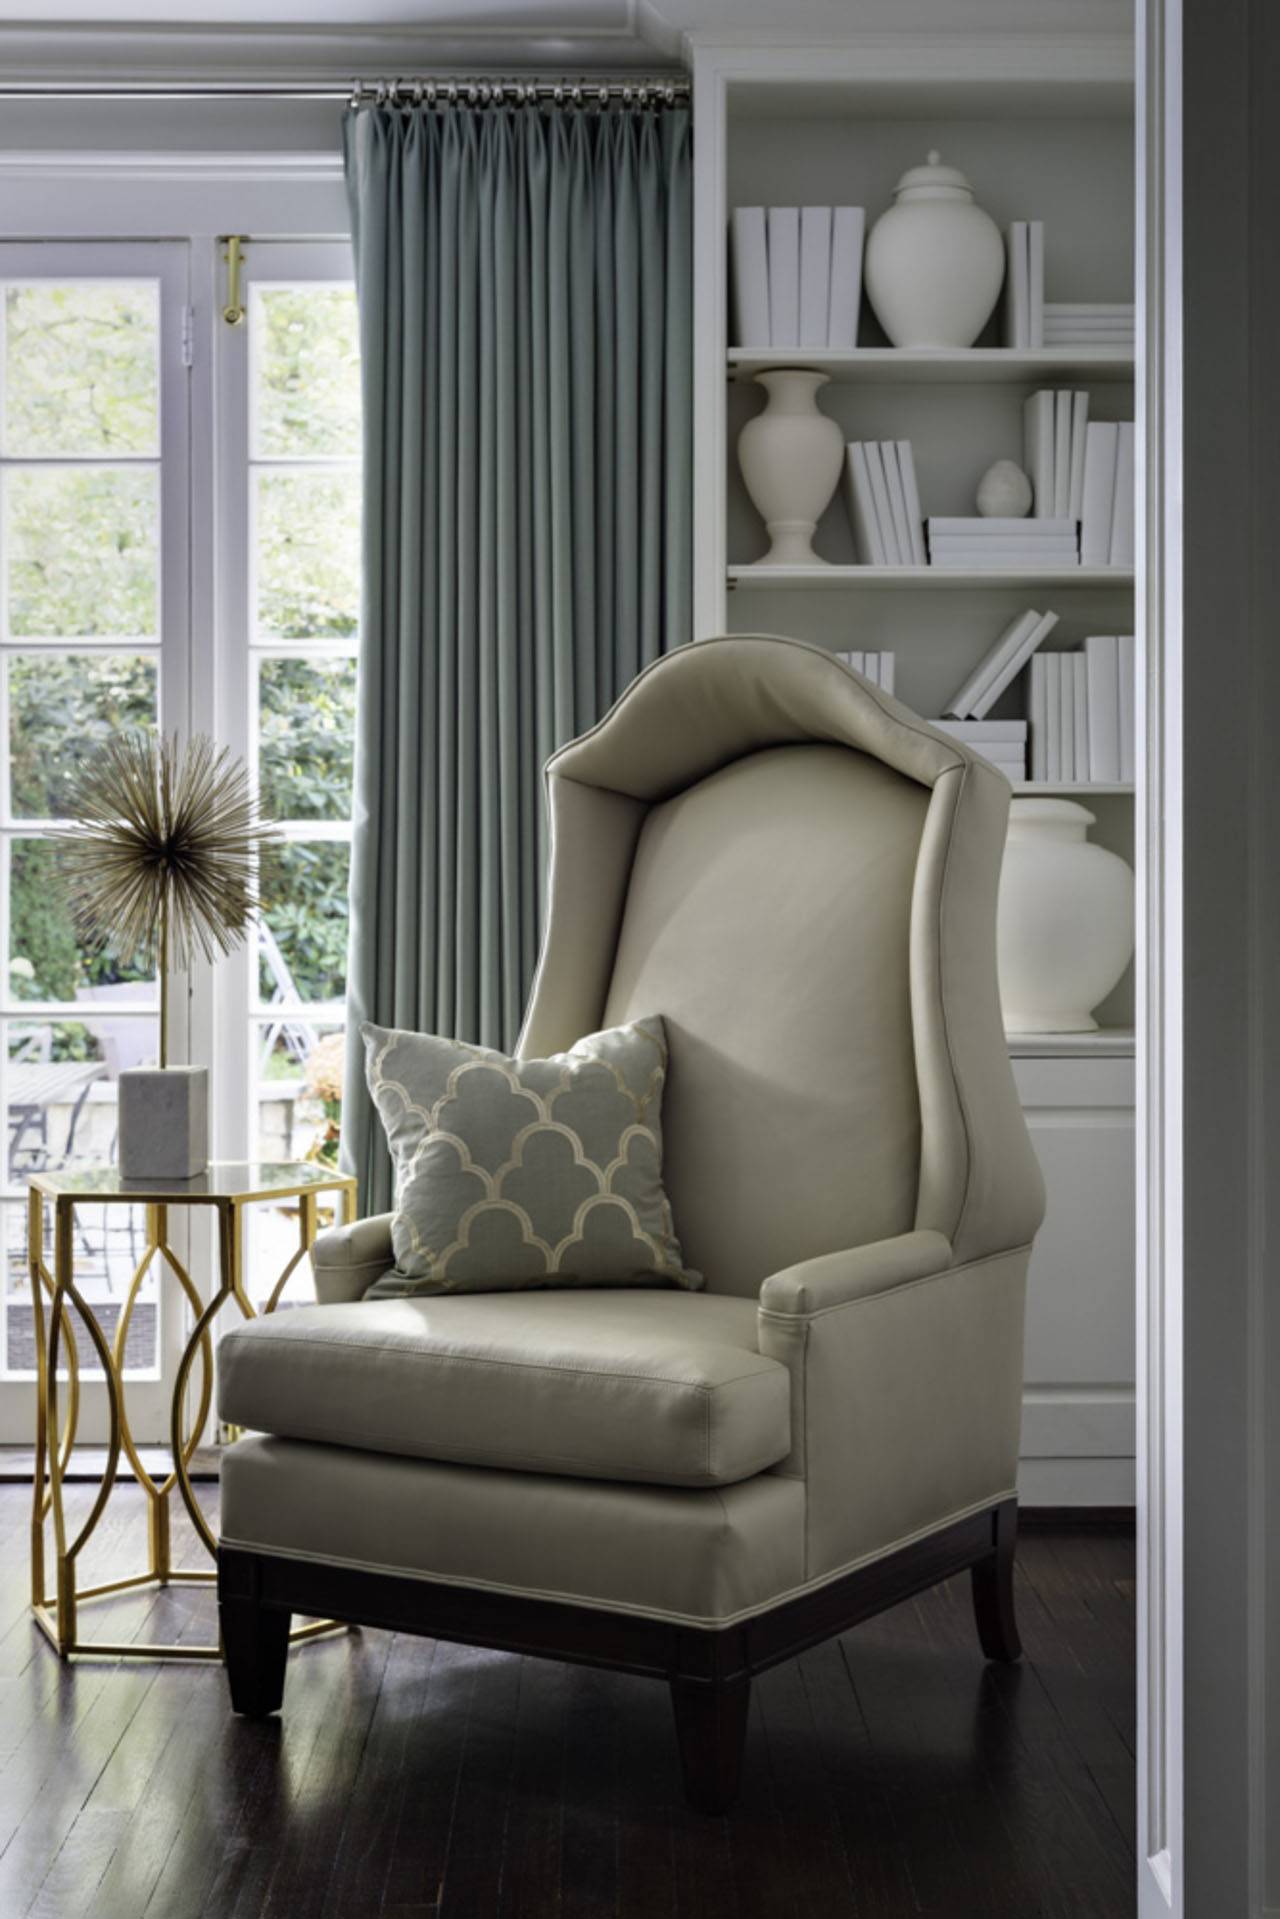 Avon Road Bhdm Comfortable Avon Road Residence By BHDM Reading Nook Furnished With Cream Wing Chair With Classy Table Dream Homes Classic Living Room Style For The Stylish Home Appearance